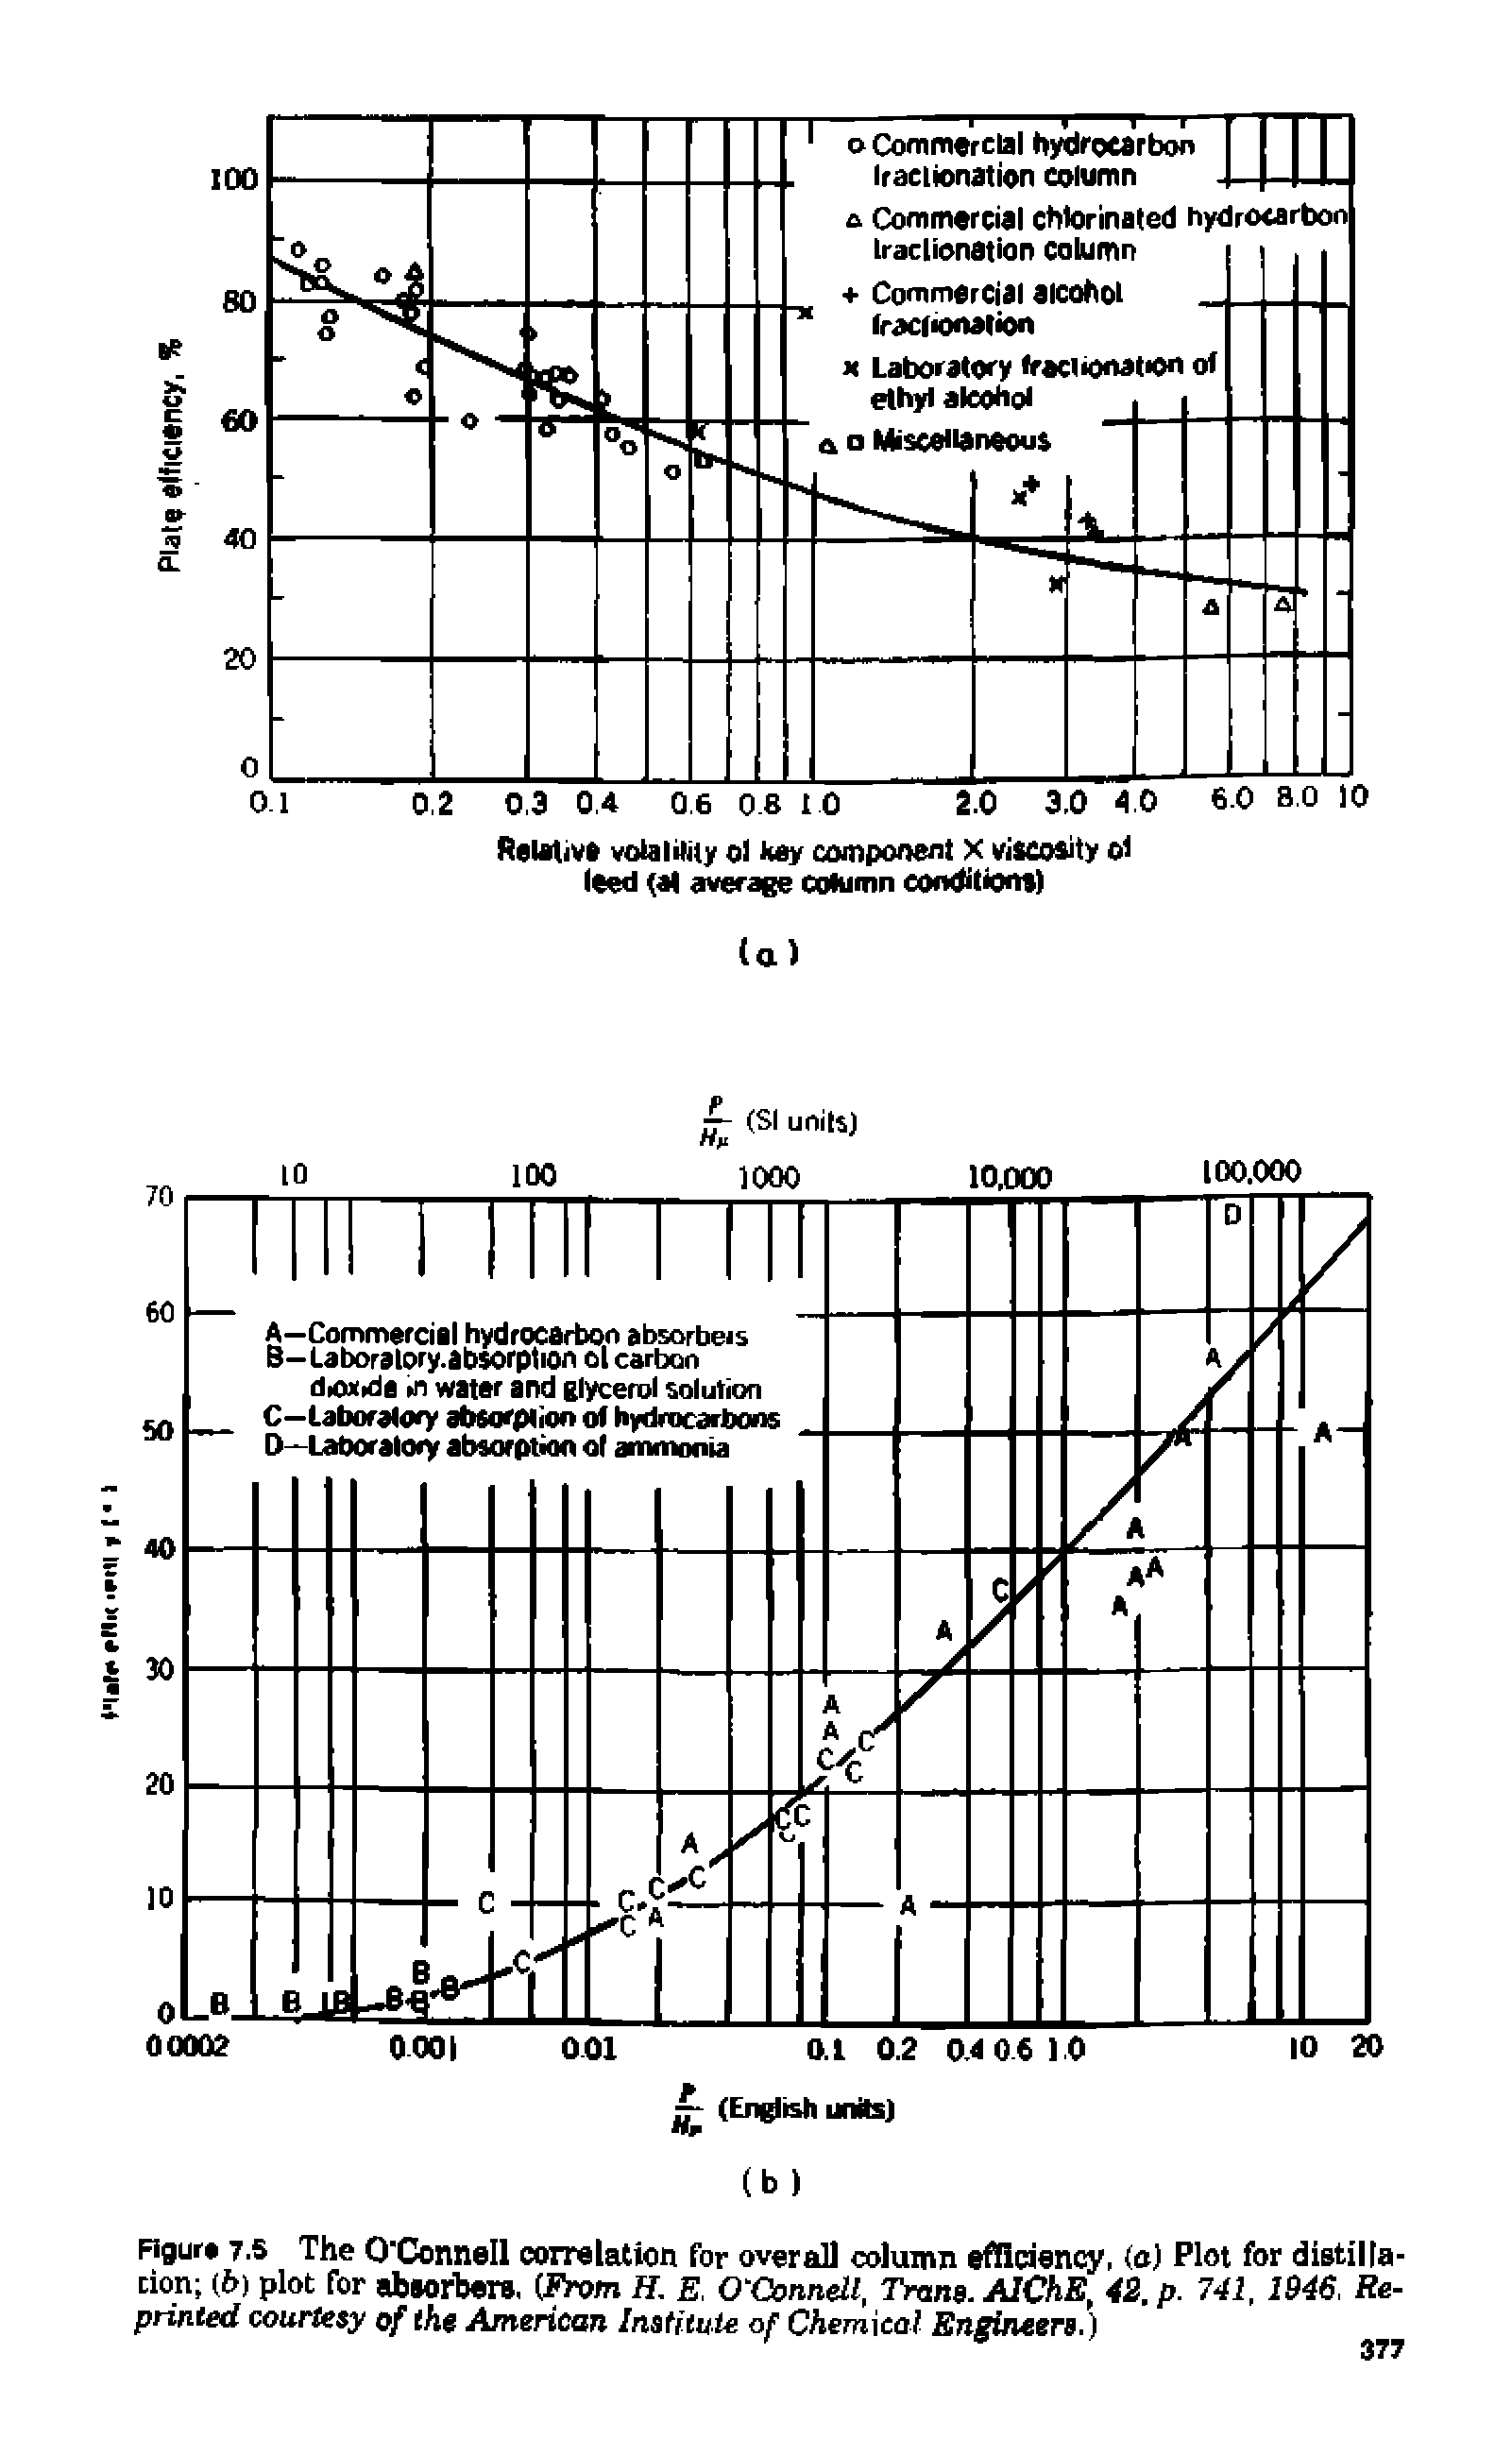 Figure 7.5 The O Connell correlation for overall column efficiency, (a) Plot for distillation (b) plot for absorbers. (Prom H. E, O Connell, Trane. AlChE, 42. p. 741, 1946, Reprinted courtesy of the American Institute of Chemical Engineers.)...